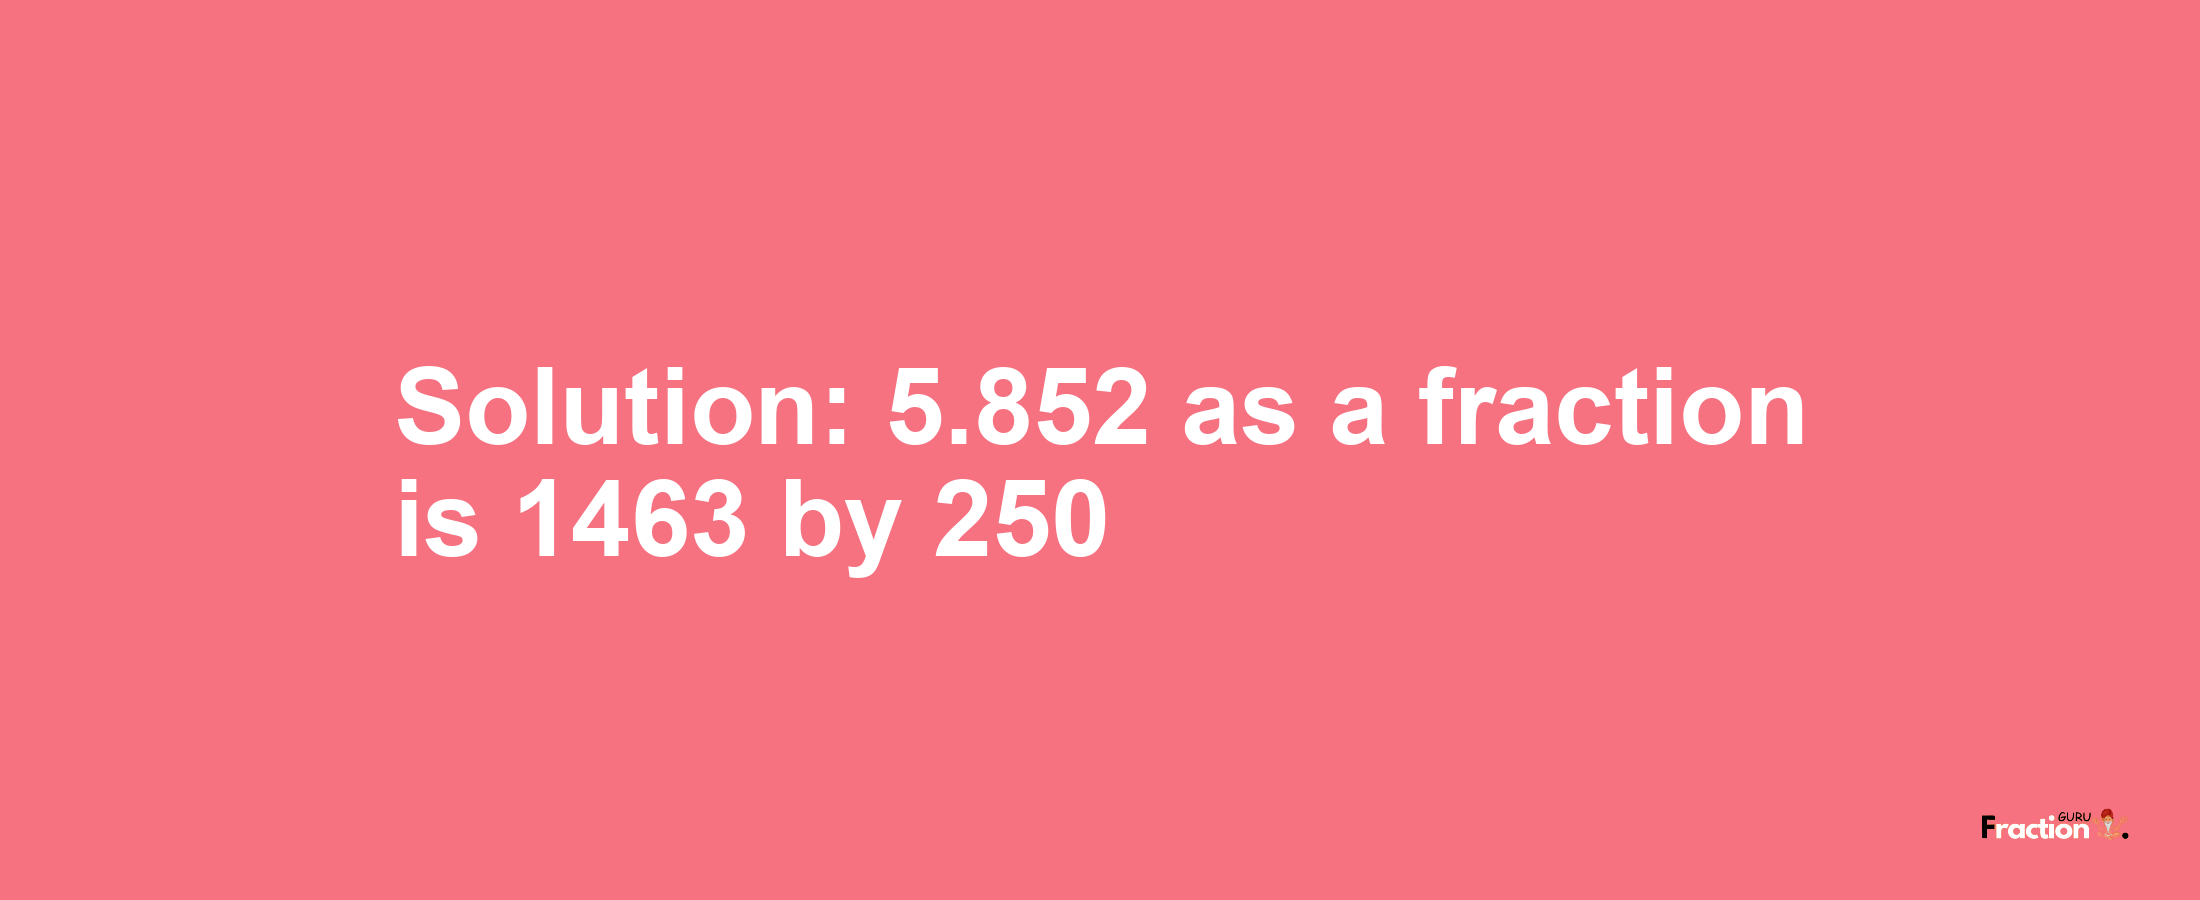 Solution:5.852 as a fraction is 1463/250